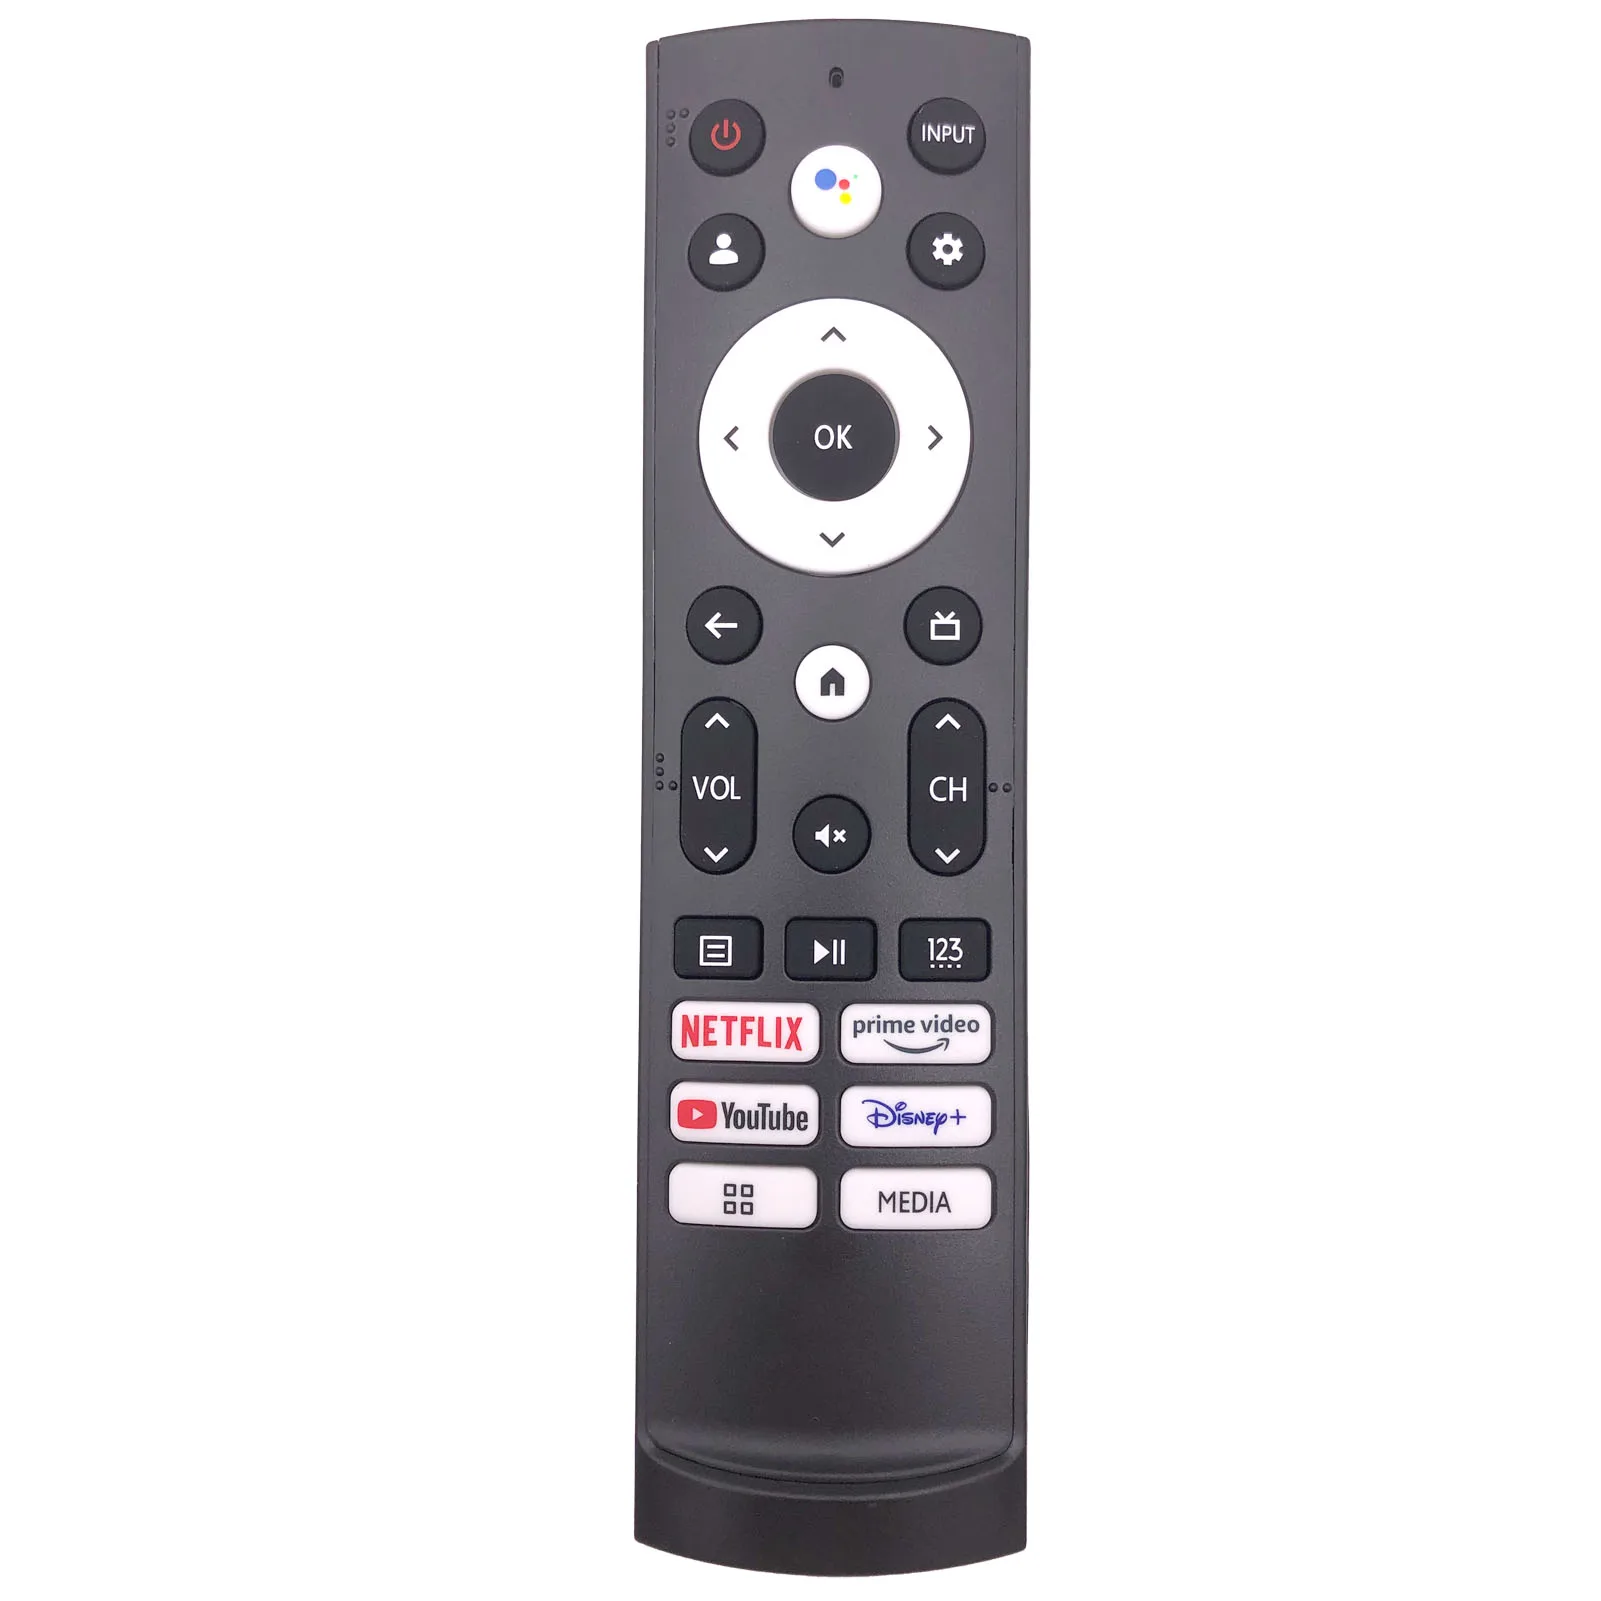 

ERF3S90H Bluetooth Voice Remote Control for Hisense 4K UHD Smart Android TV